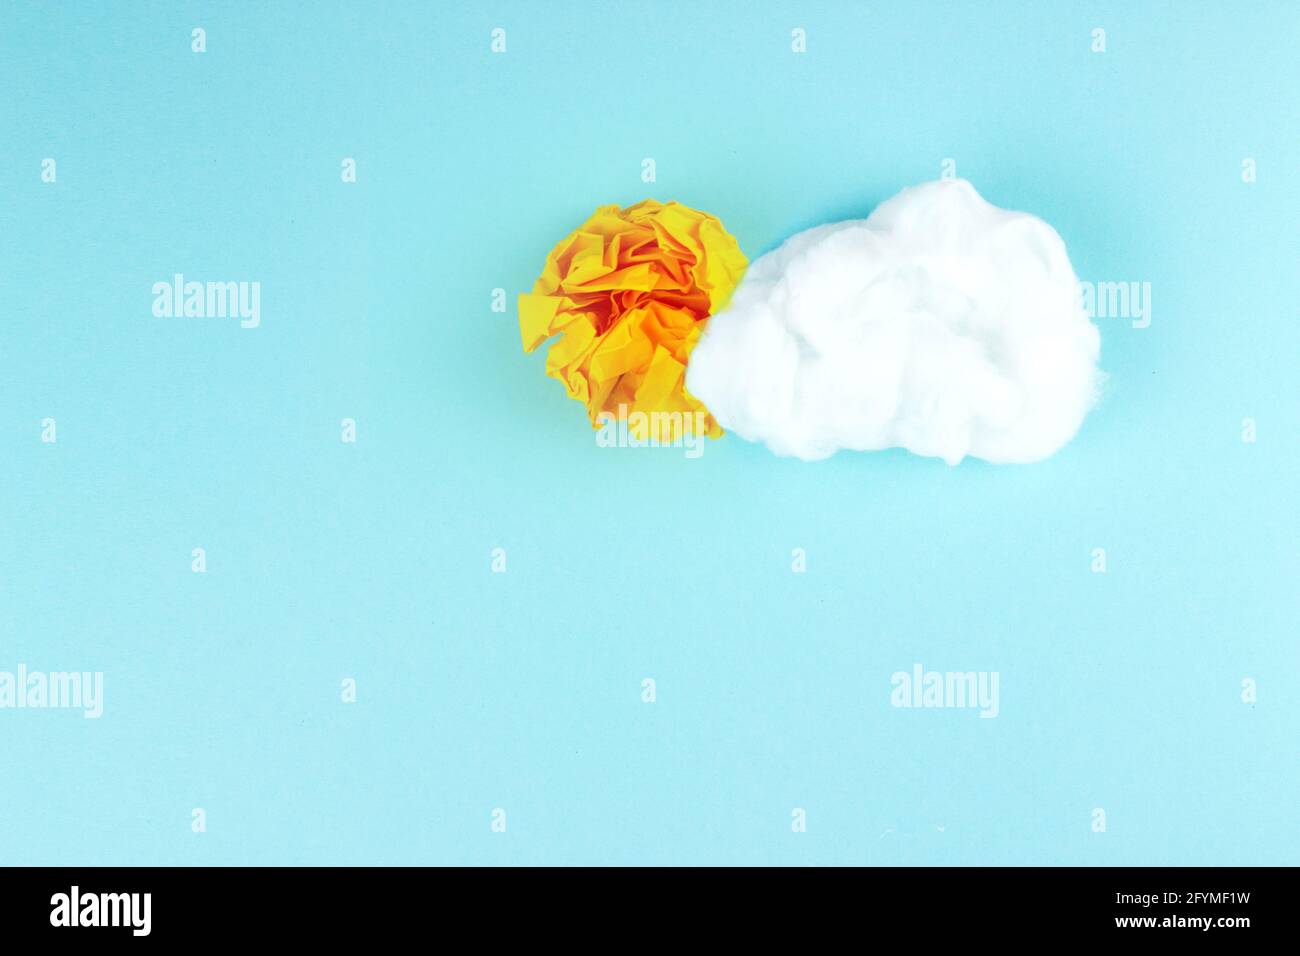 Shining sun concept with crumpled paper ball and cloud. Idea Concept Background. Stock Photo